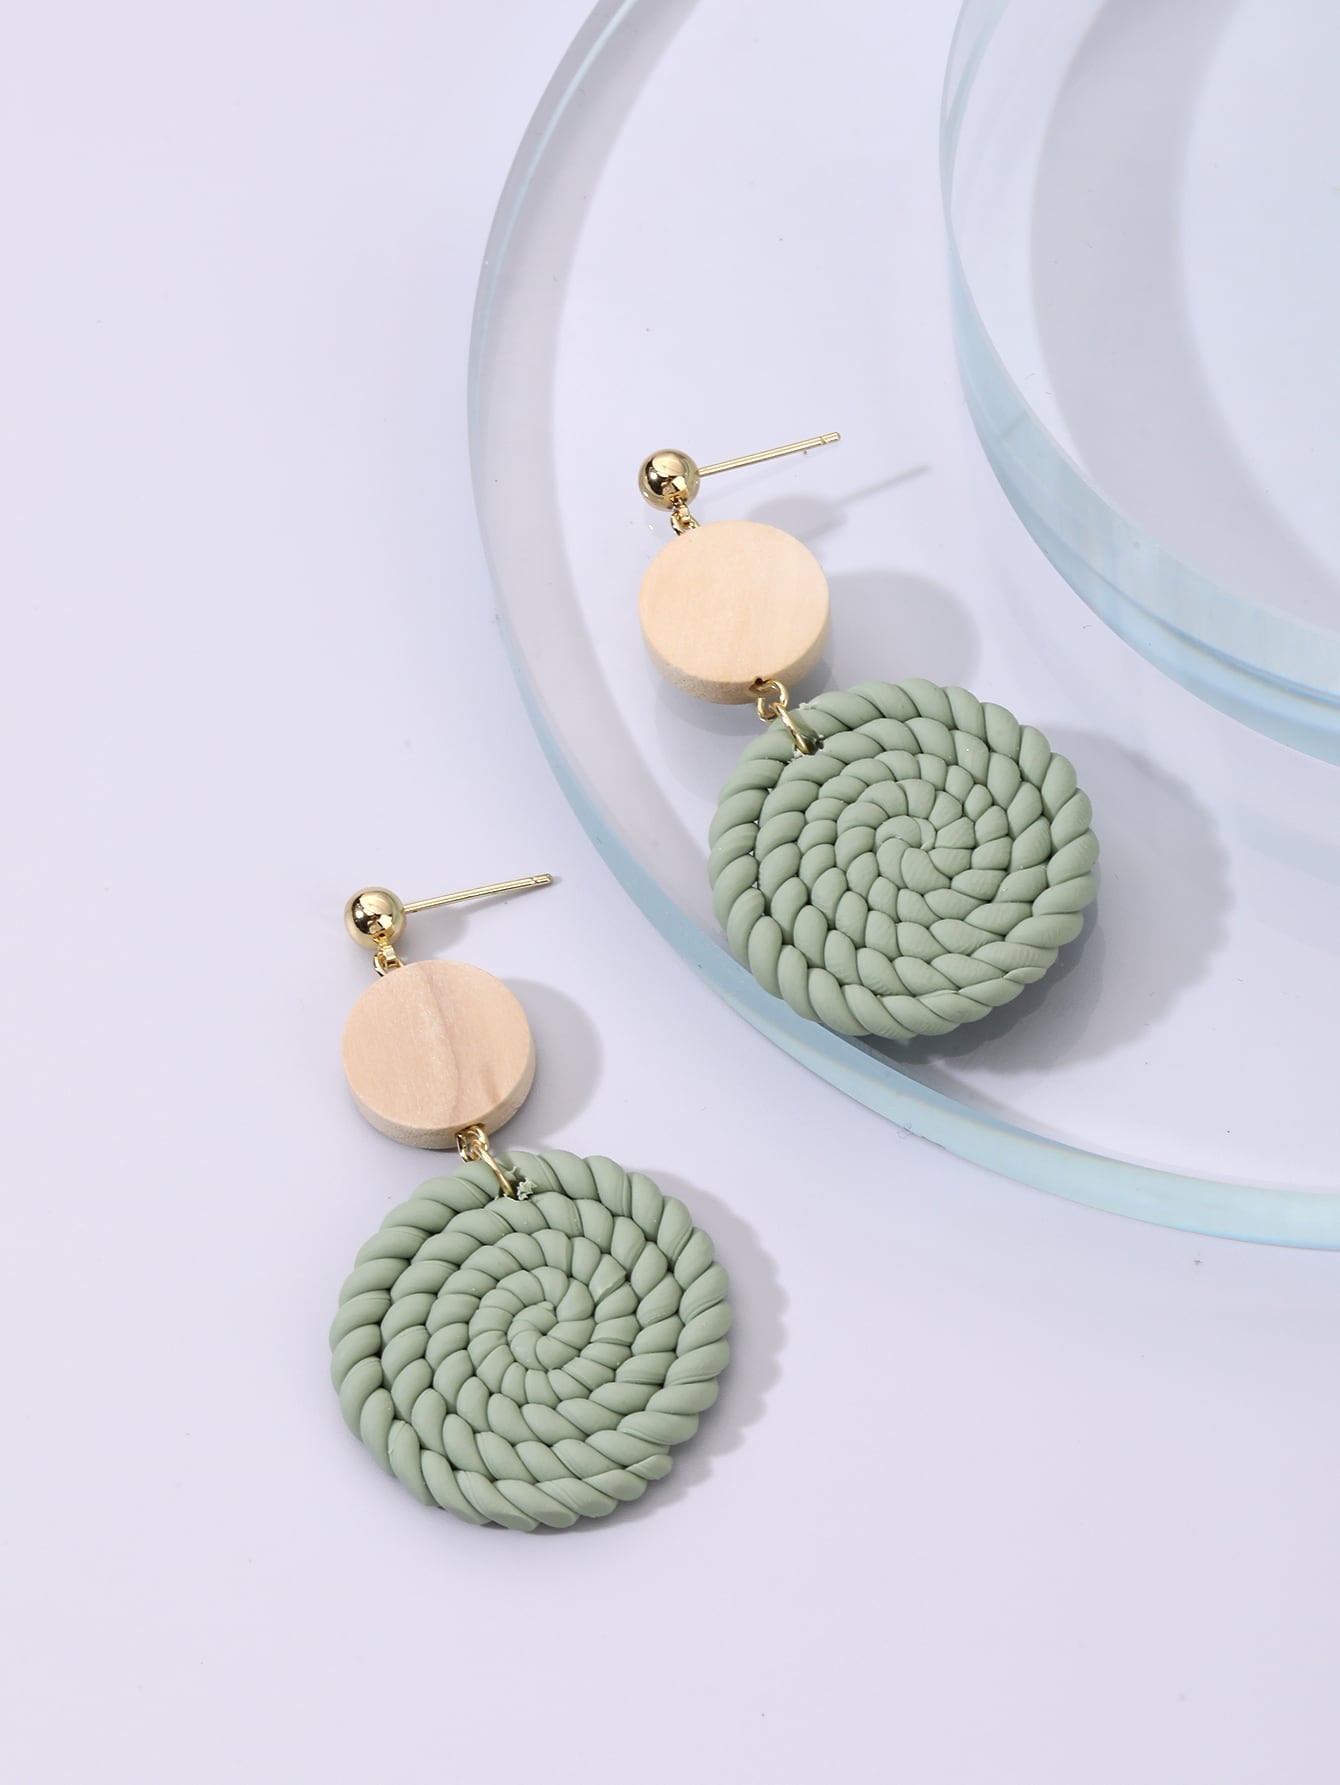 1Pair Simple Woven Light Pink Soft Pottery & Wood Drop Earrings for Women, Suitable for Vacation, Party, Gift Giving